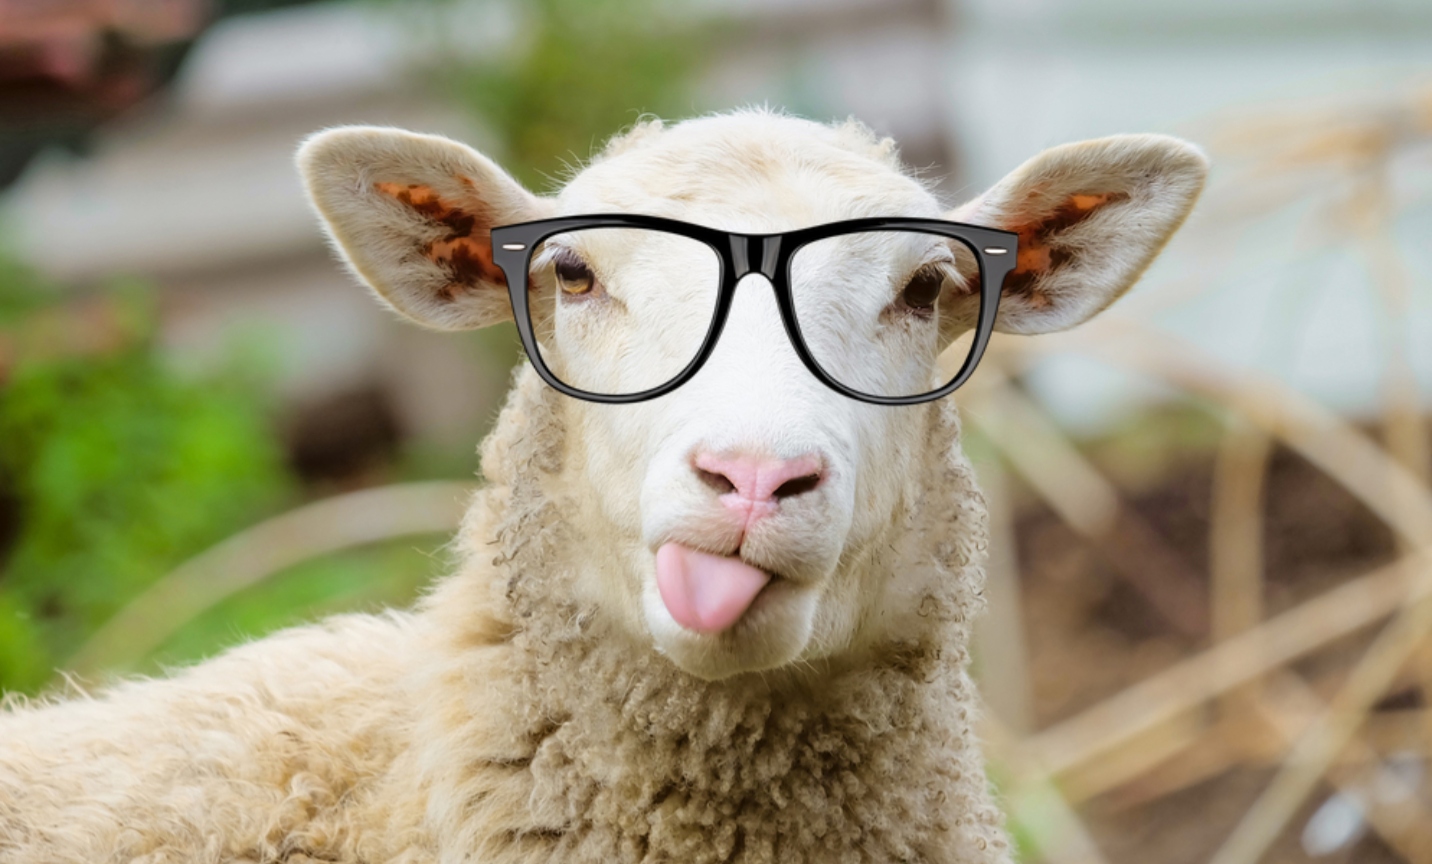 Bespectacled Sheep